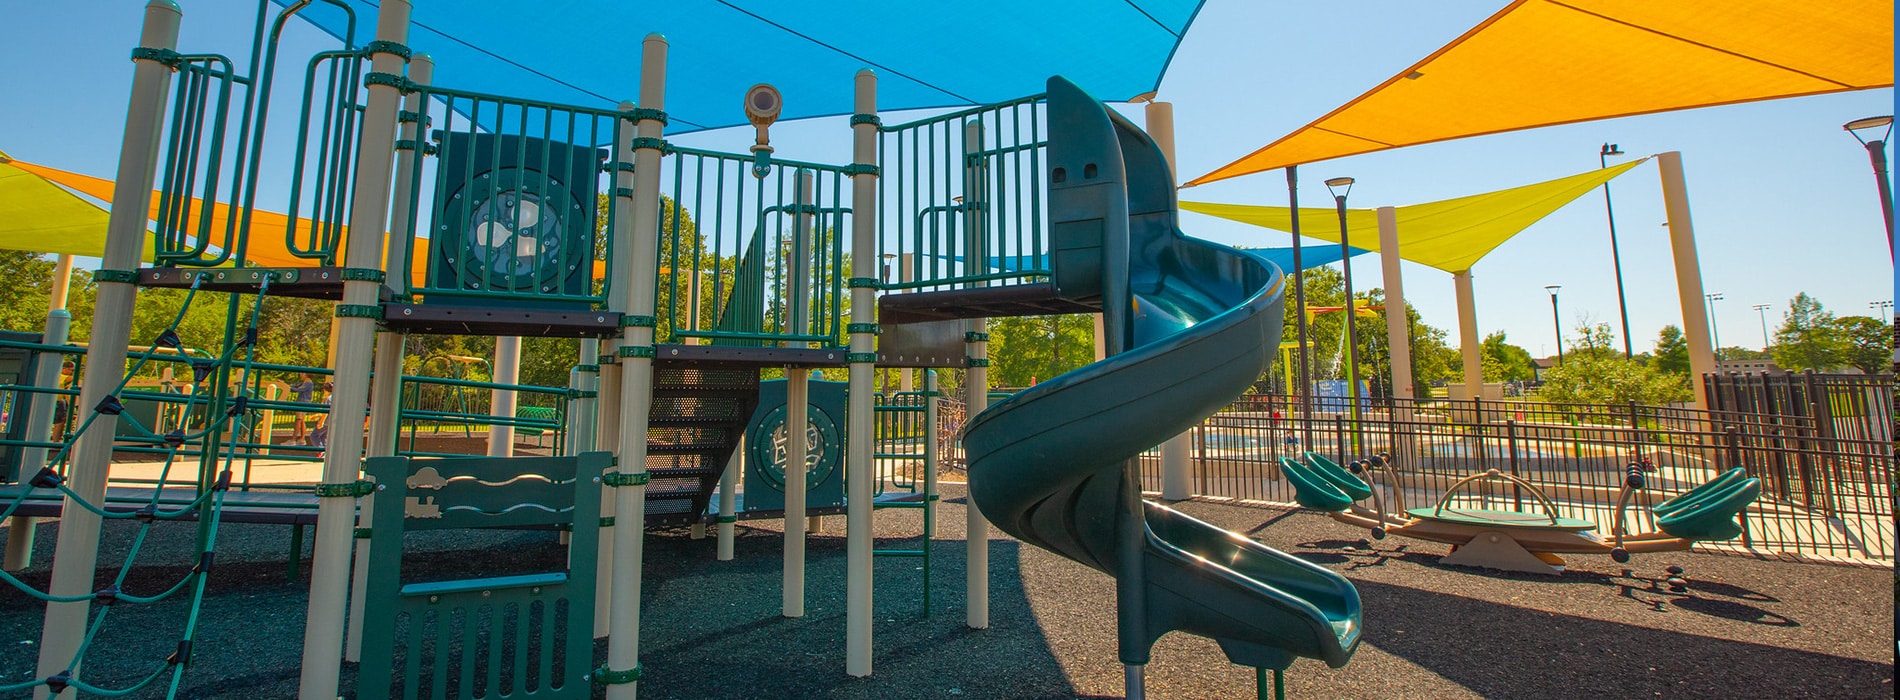 Fun for All Playground at Central Park in College Station